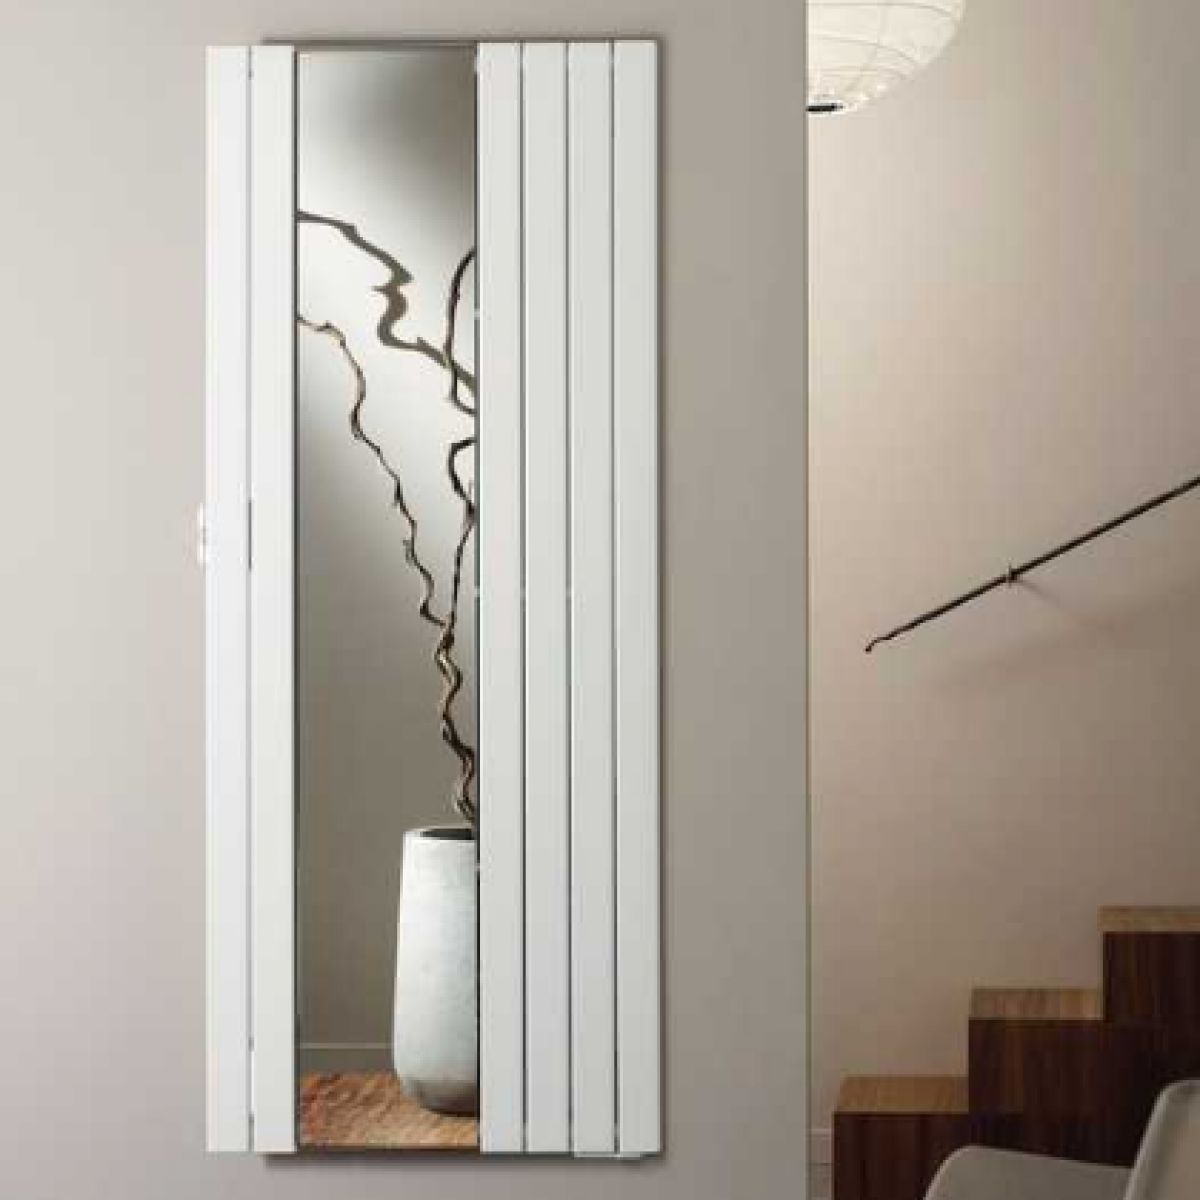 picture of a contemporary bathroom radiator